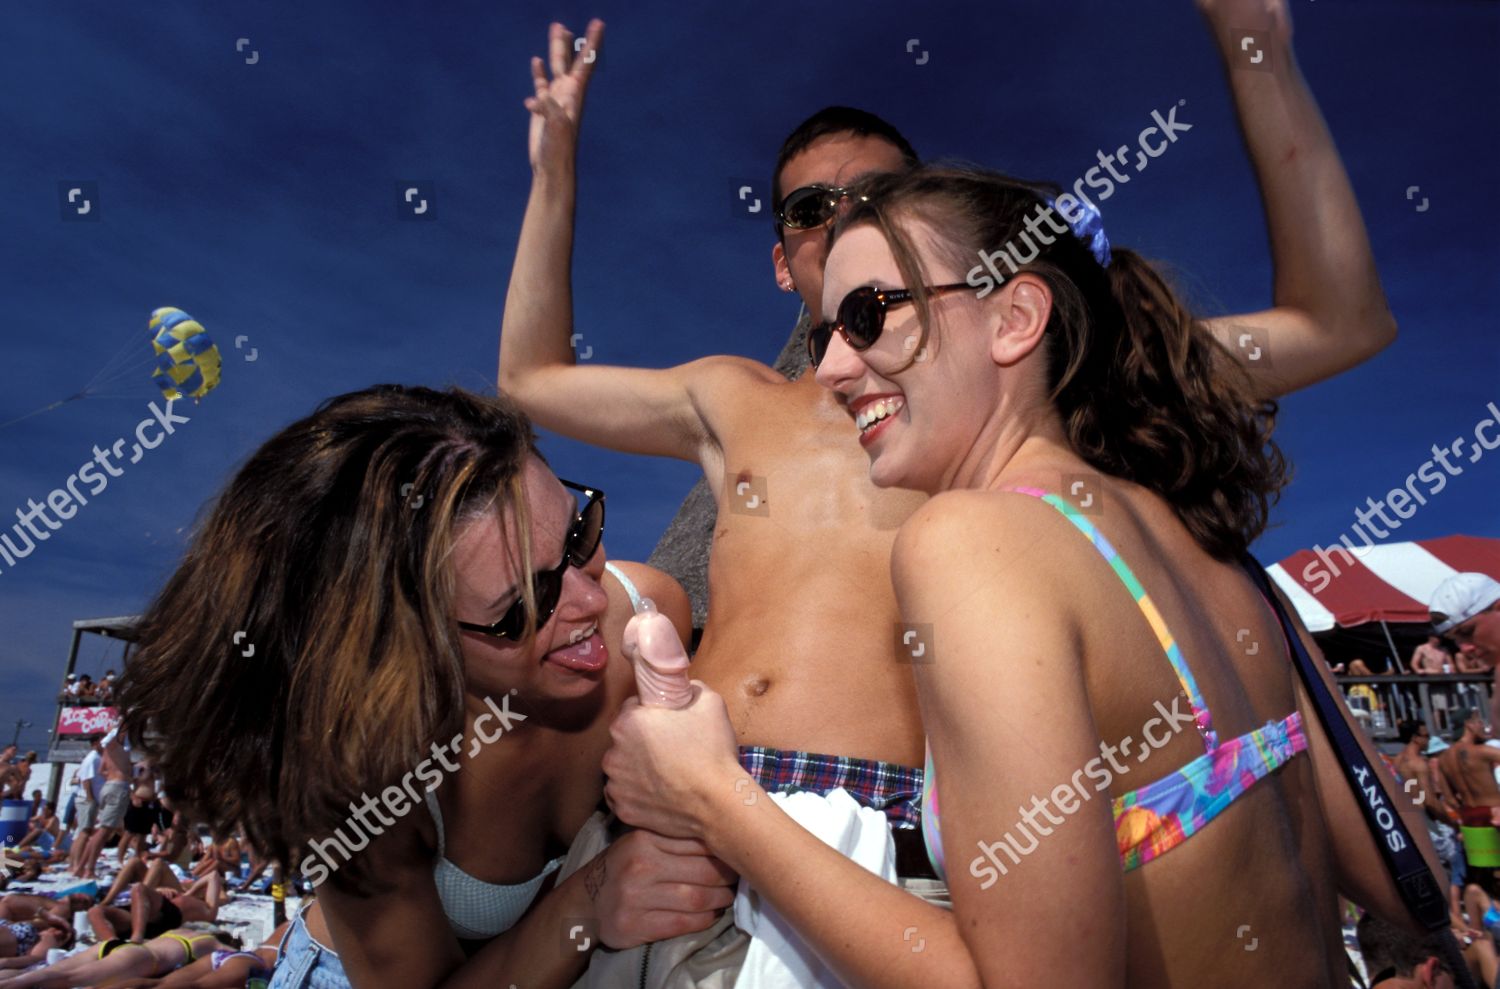 Students Involved Sex On Beach Antics Editorial Stock Photo photo picture